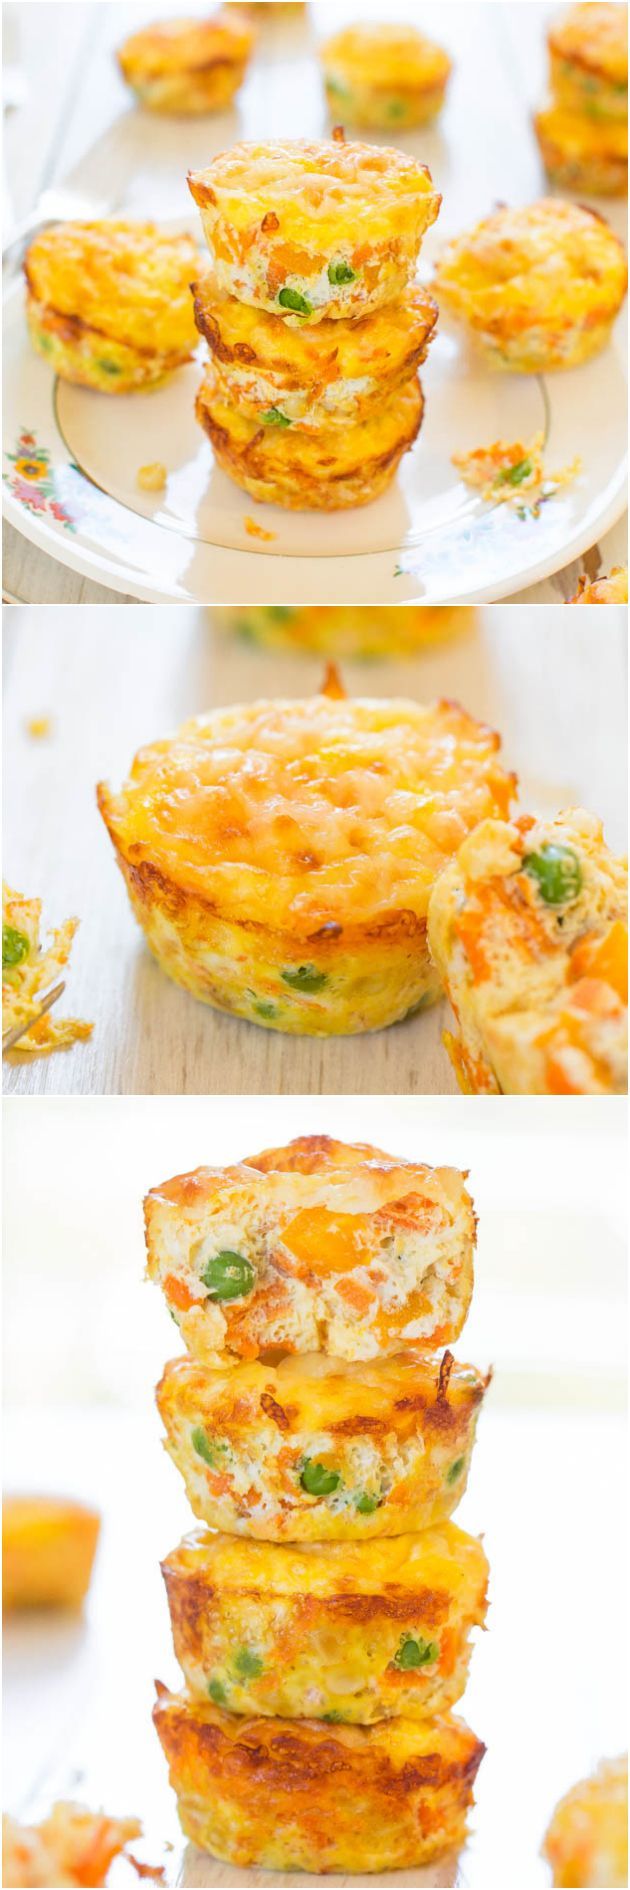 100-Calorie Cheese, Vegetable and Egg Muffins (GF) – Healthy, easy & only 100 calories! You’ll want to keep a stash on hand!